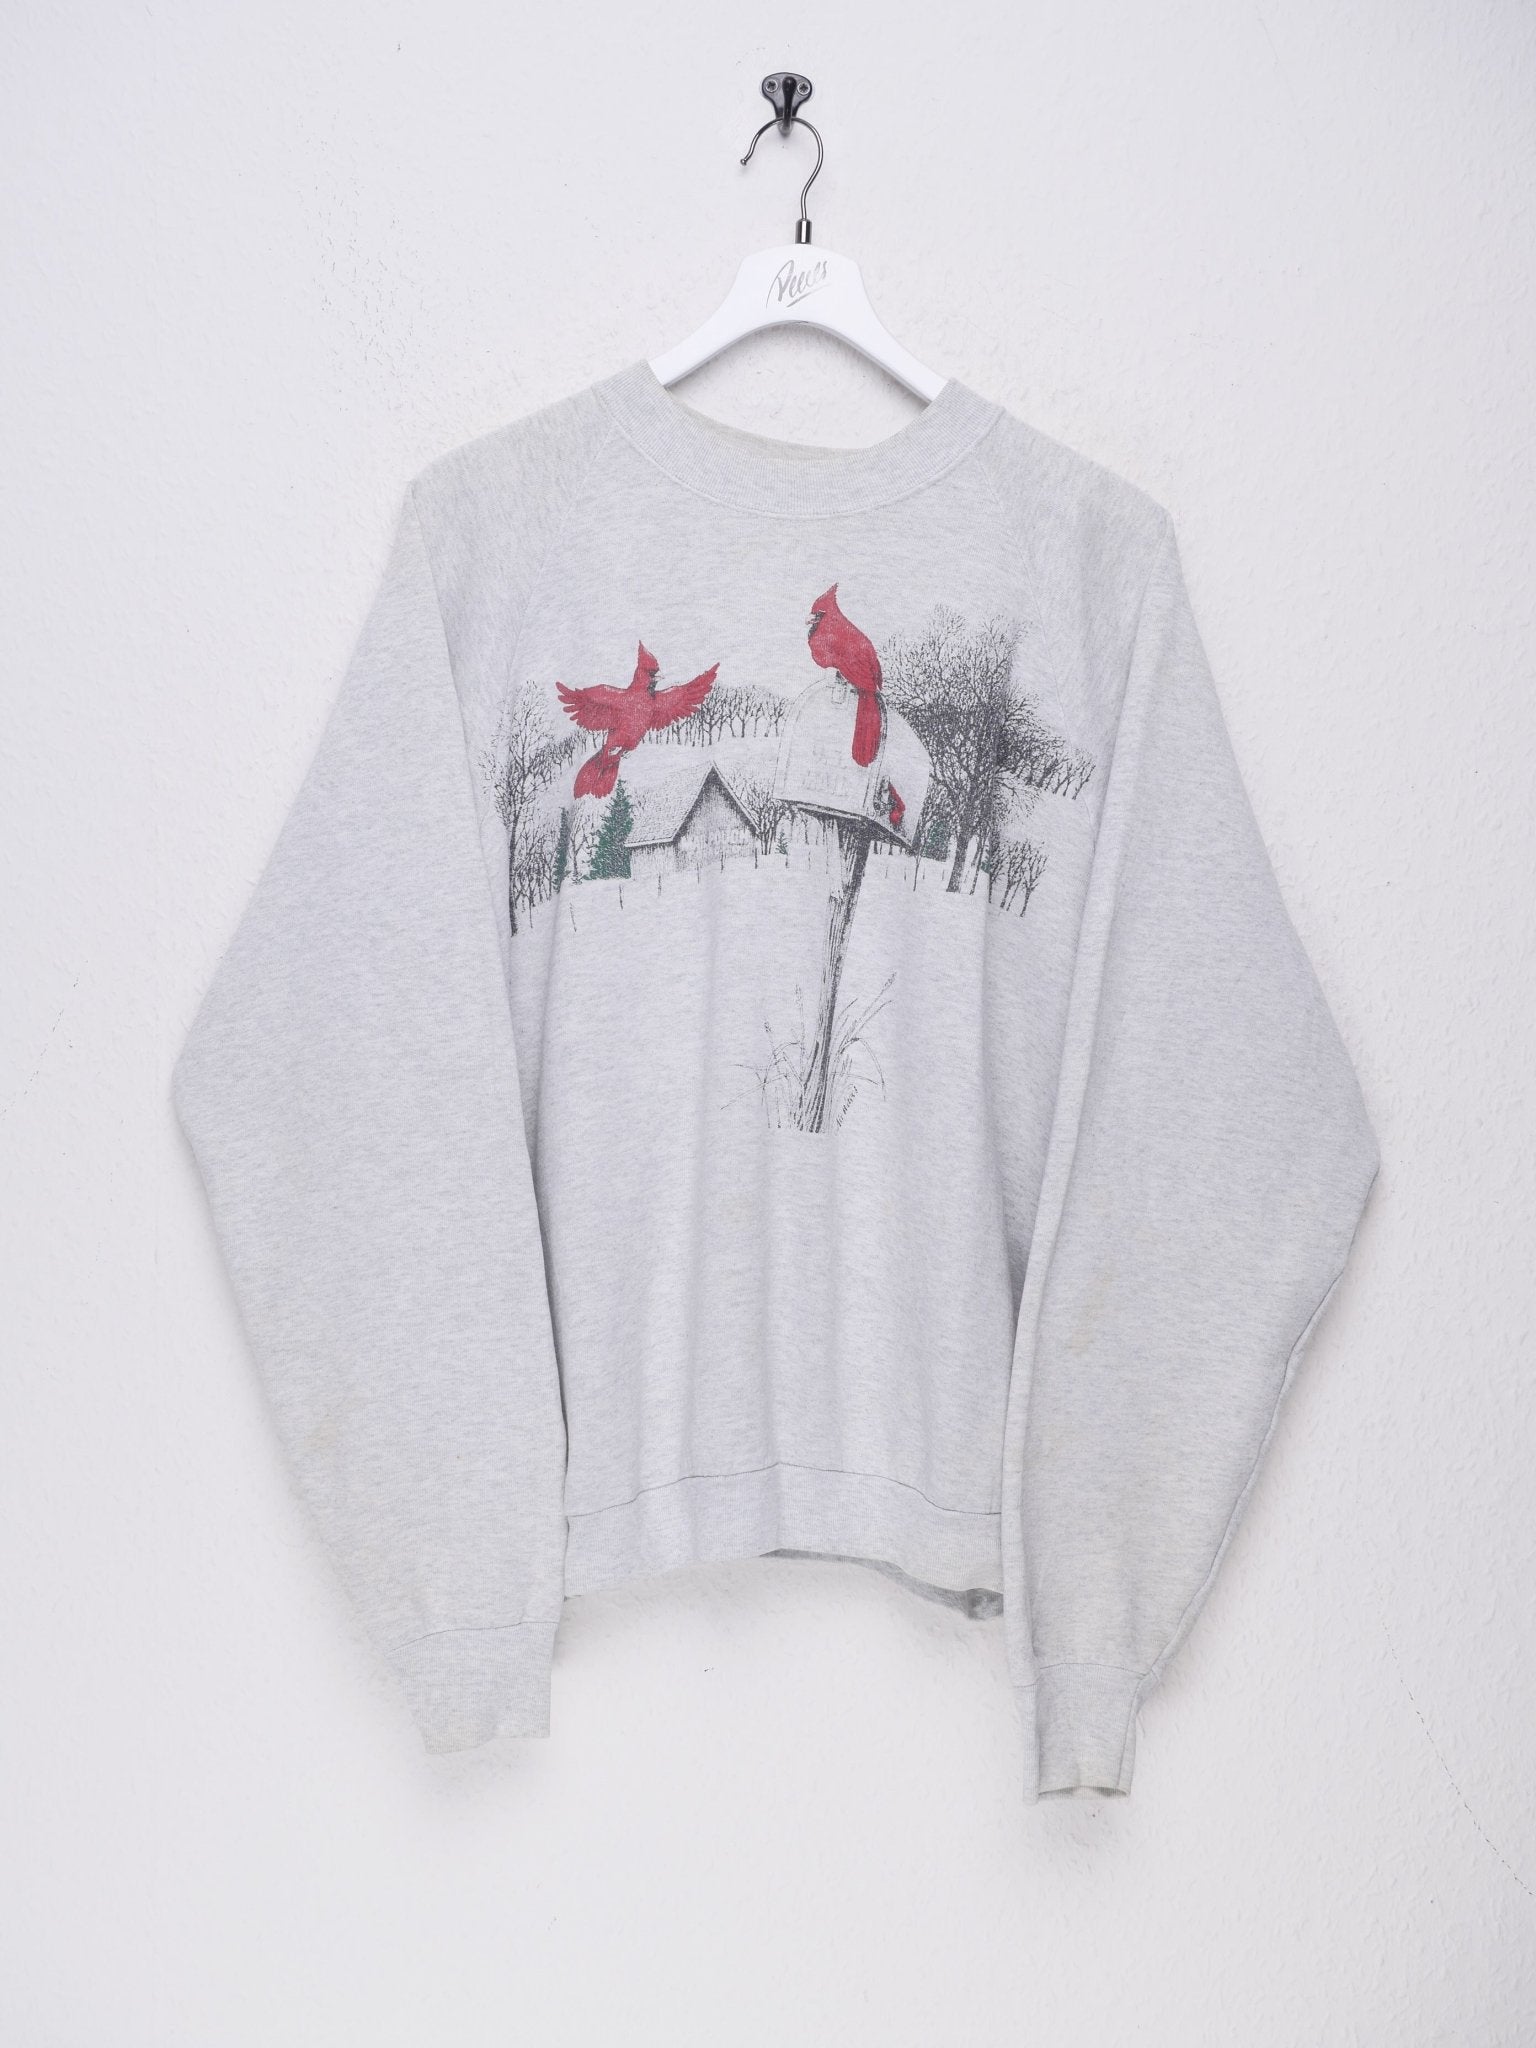 Vintage printed Graphic Sweater - Peeces